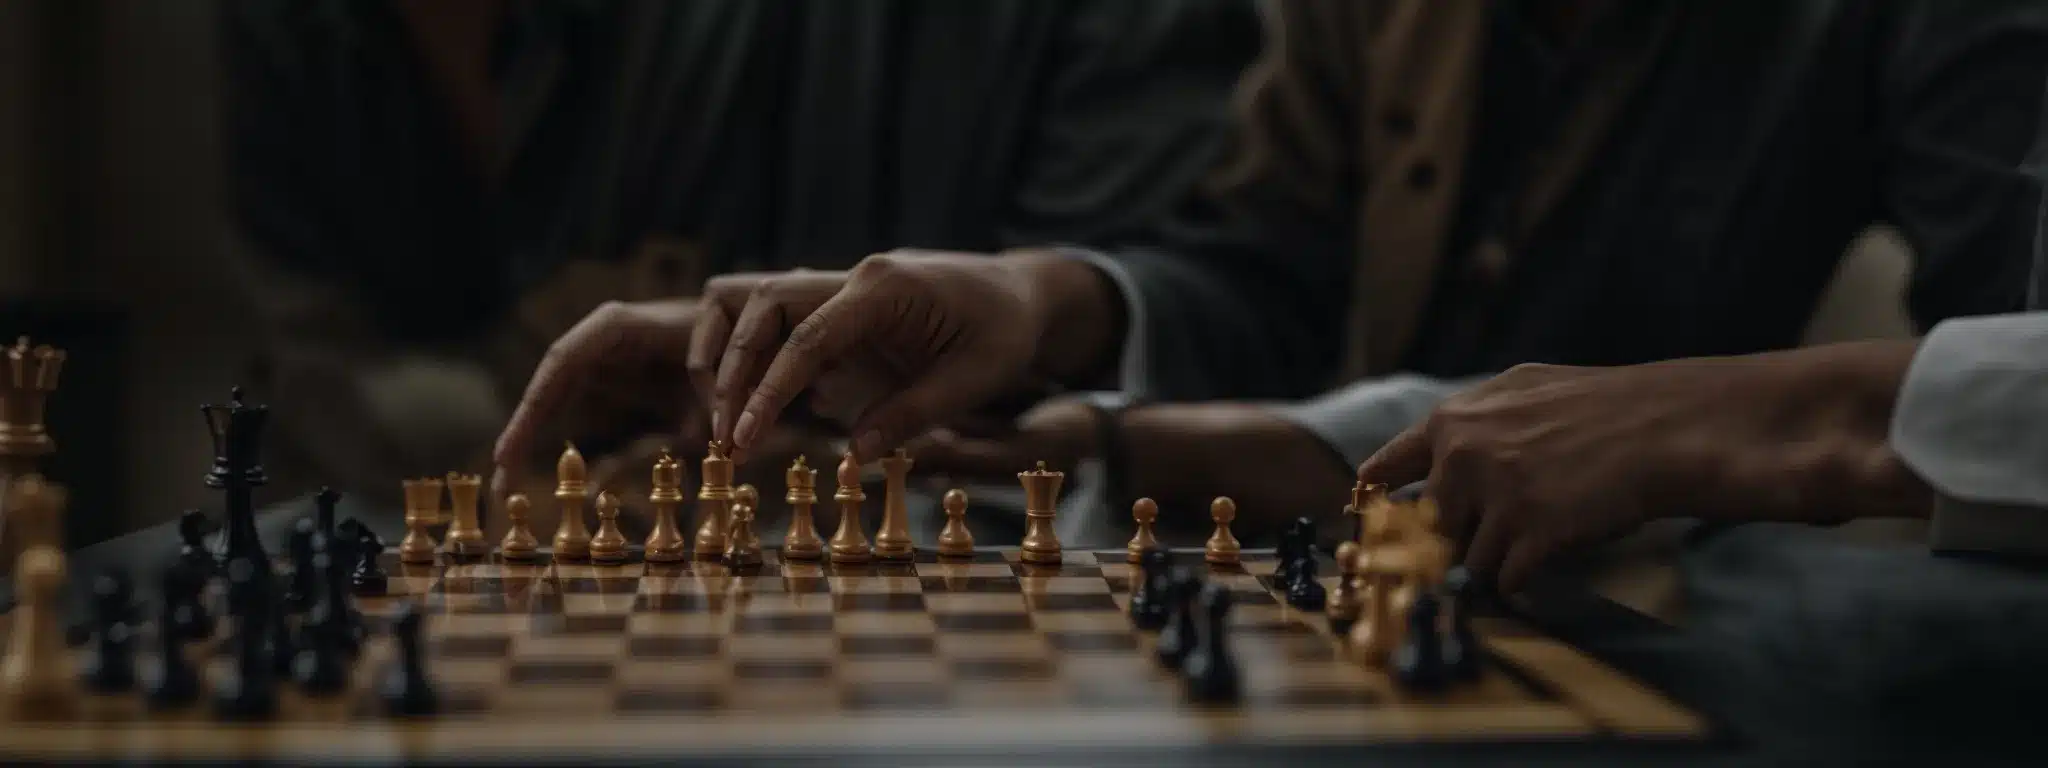 A Keen-Eyed Entrepreneur Places A Figurine Of A Knight On A Chessboard, Symbolizing Strategic Planning In Business.